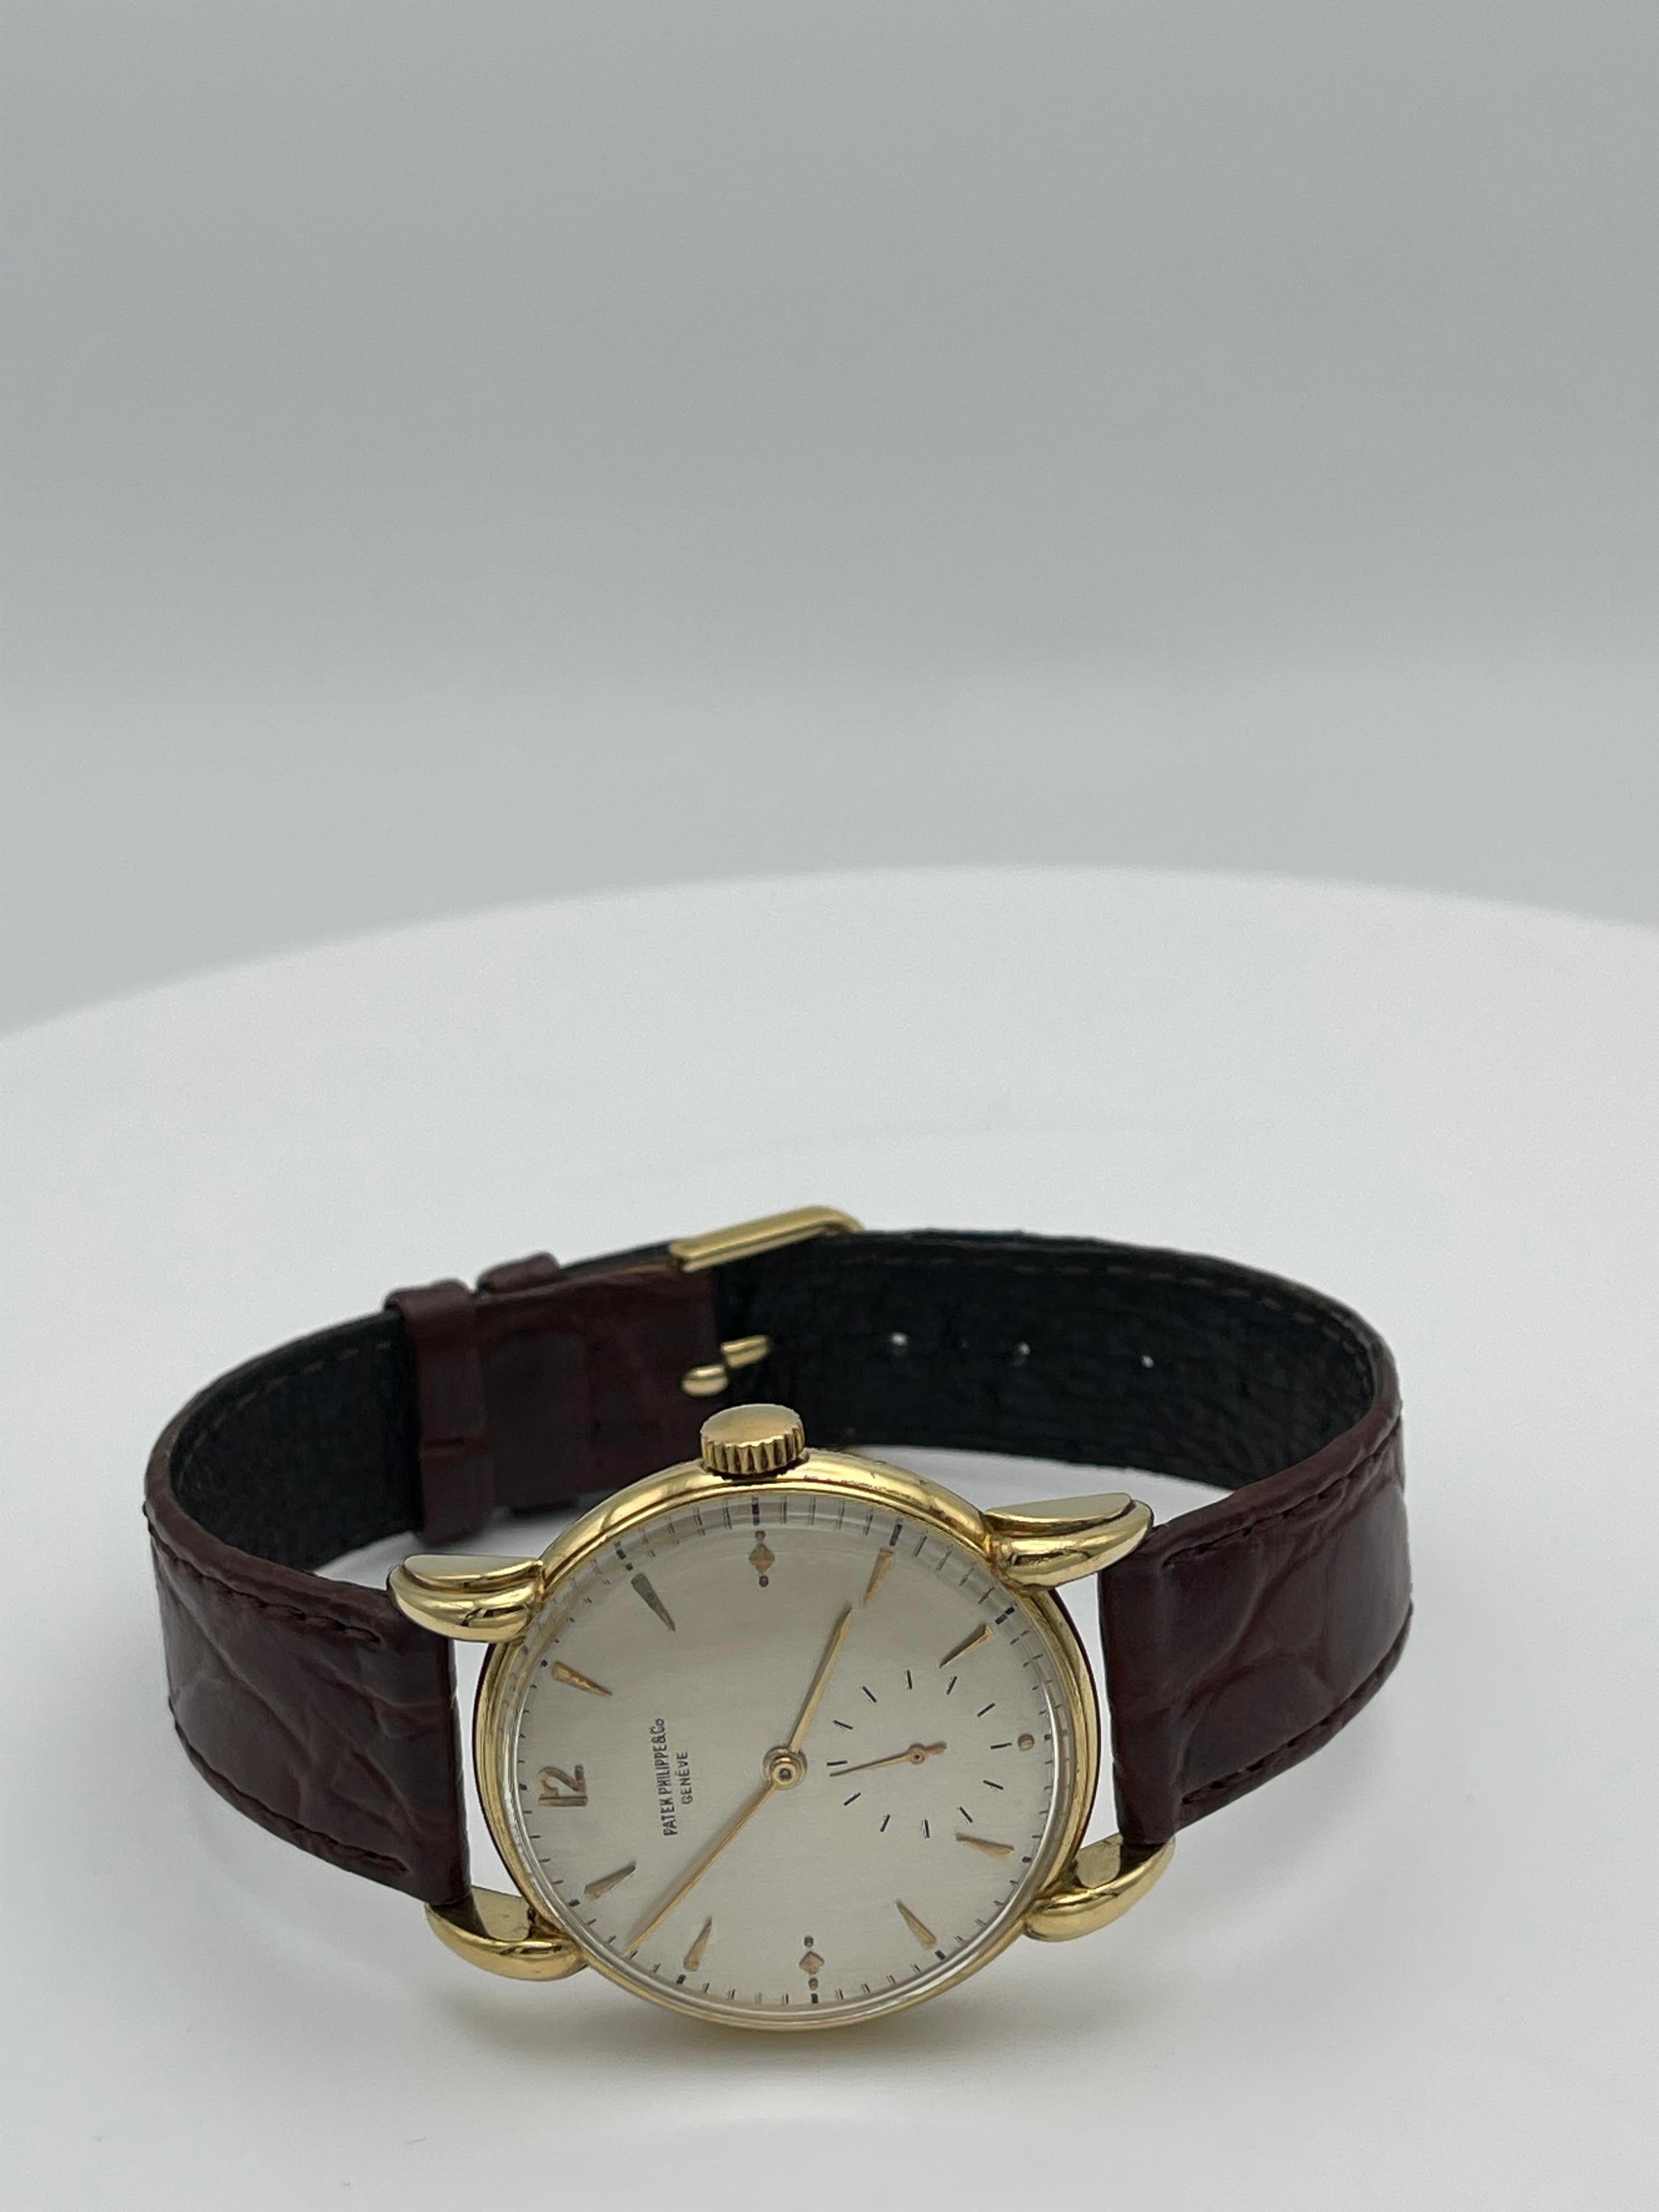 Vintage Patek Philippe Handwriting Watch Ref. 1590
Ser# 655670
Watchcase: 35mm
Brown Patek krokoleather watch strap 
Fully serviced by a professional watchmaker with 53 years of experience 
18k Yellow Gold .750 
Silver beige dial
 8 1/4 in.
Perfect